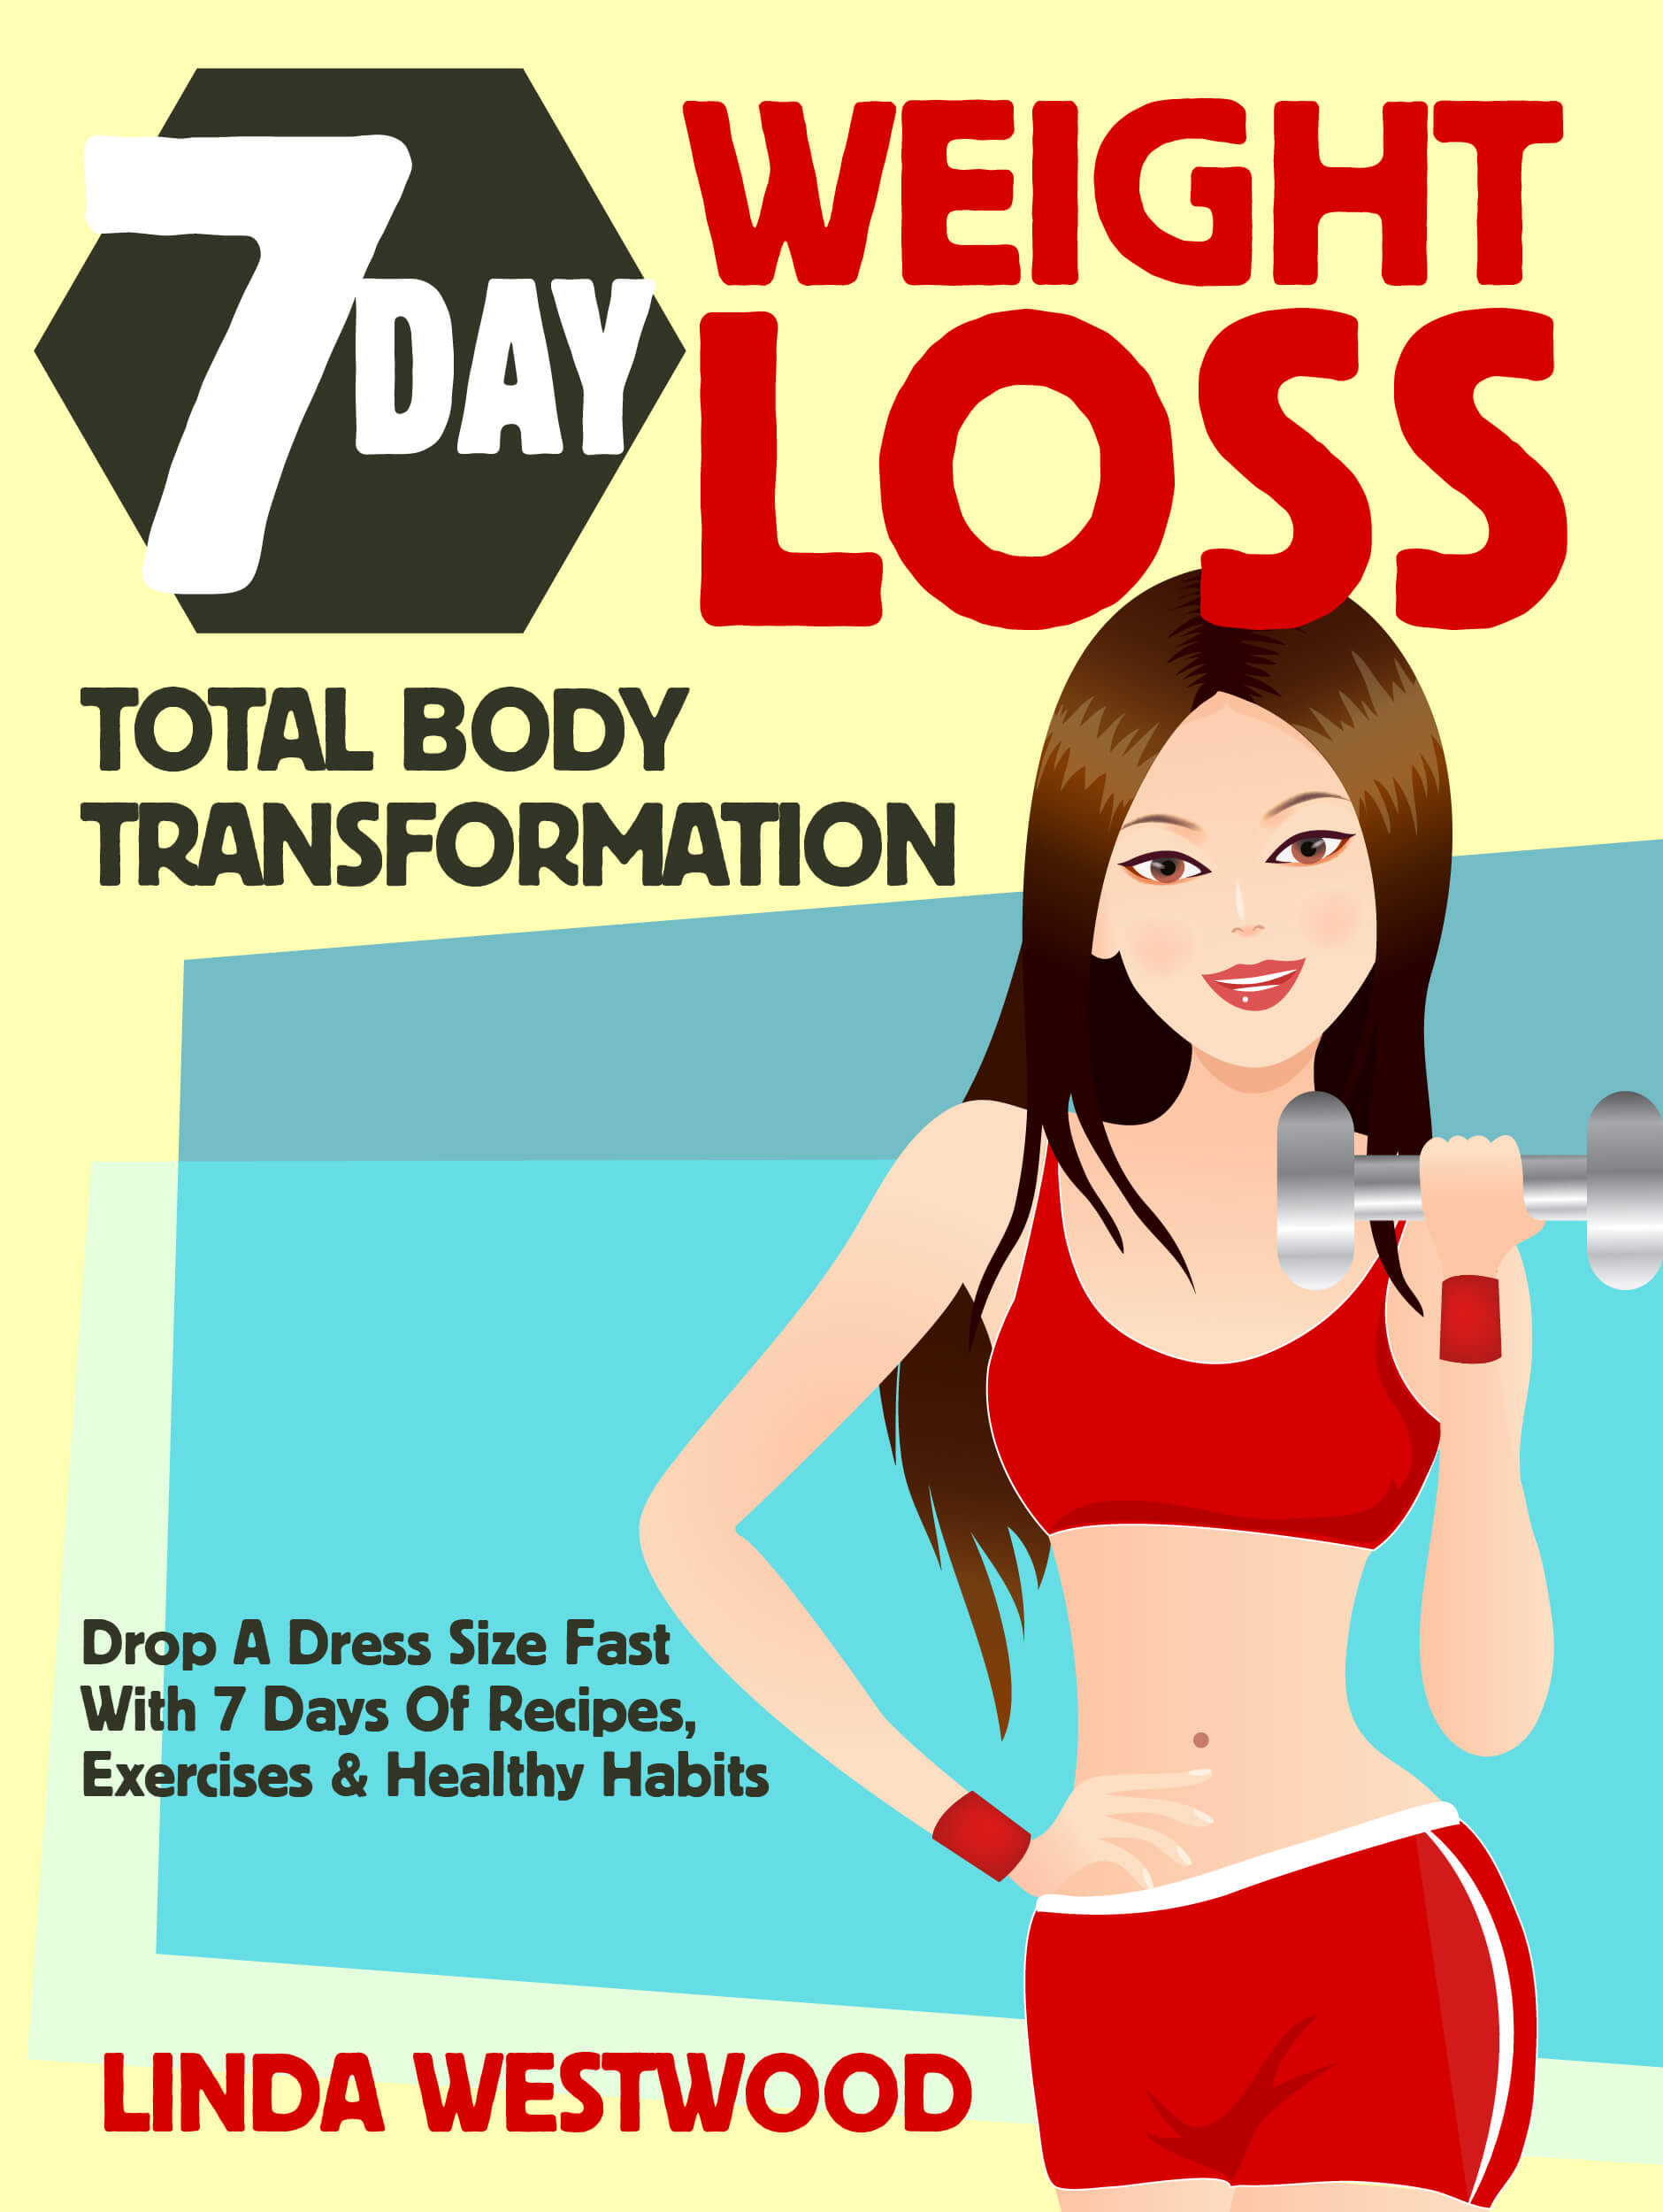 FREE: 7-Day Weight Loss (2nd Edition): Total Body Transformation – Drop A Dress Size Fast With 7 Days of Recipes, Exercises & Healthy Habits! by Linda Westwood